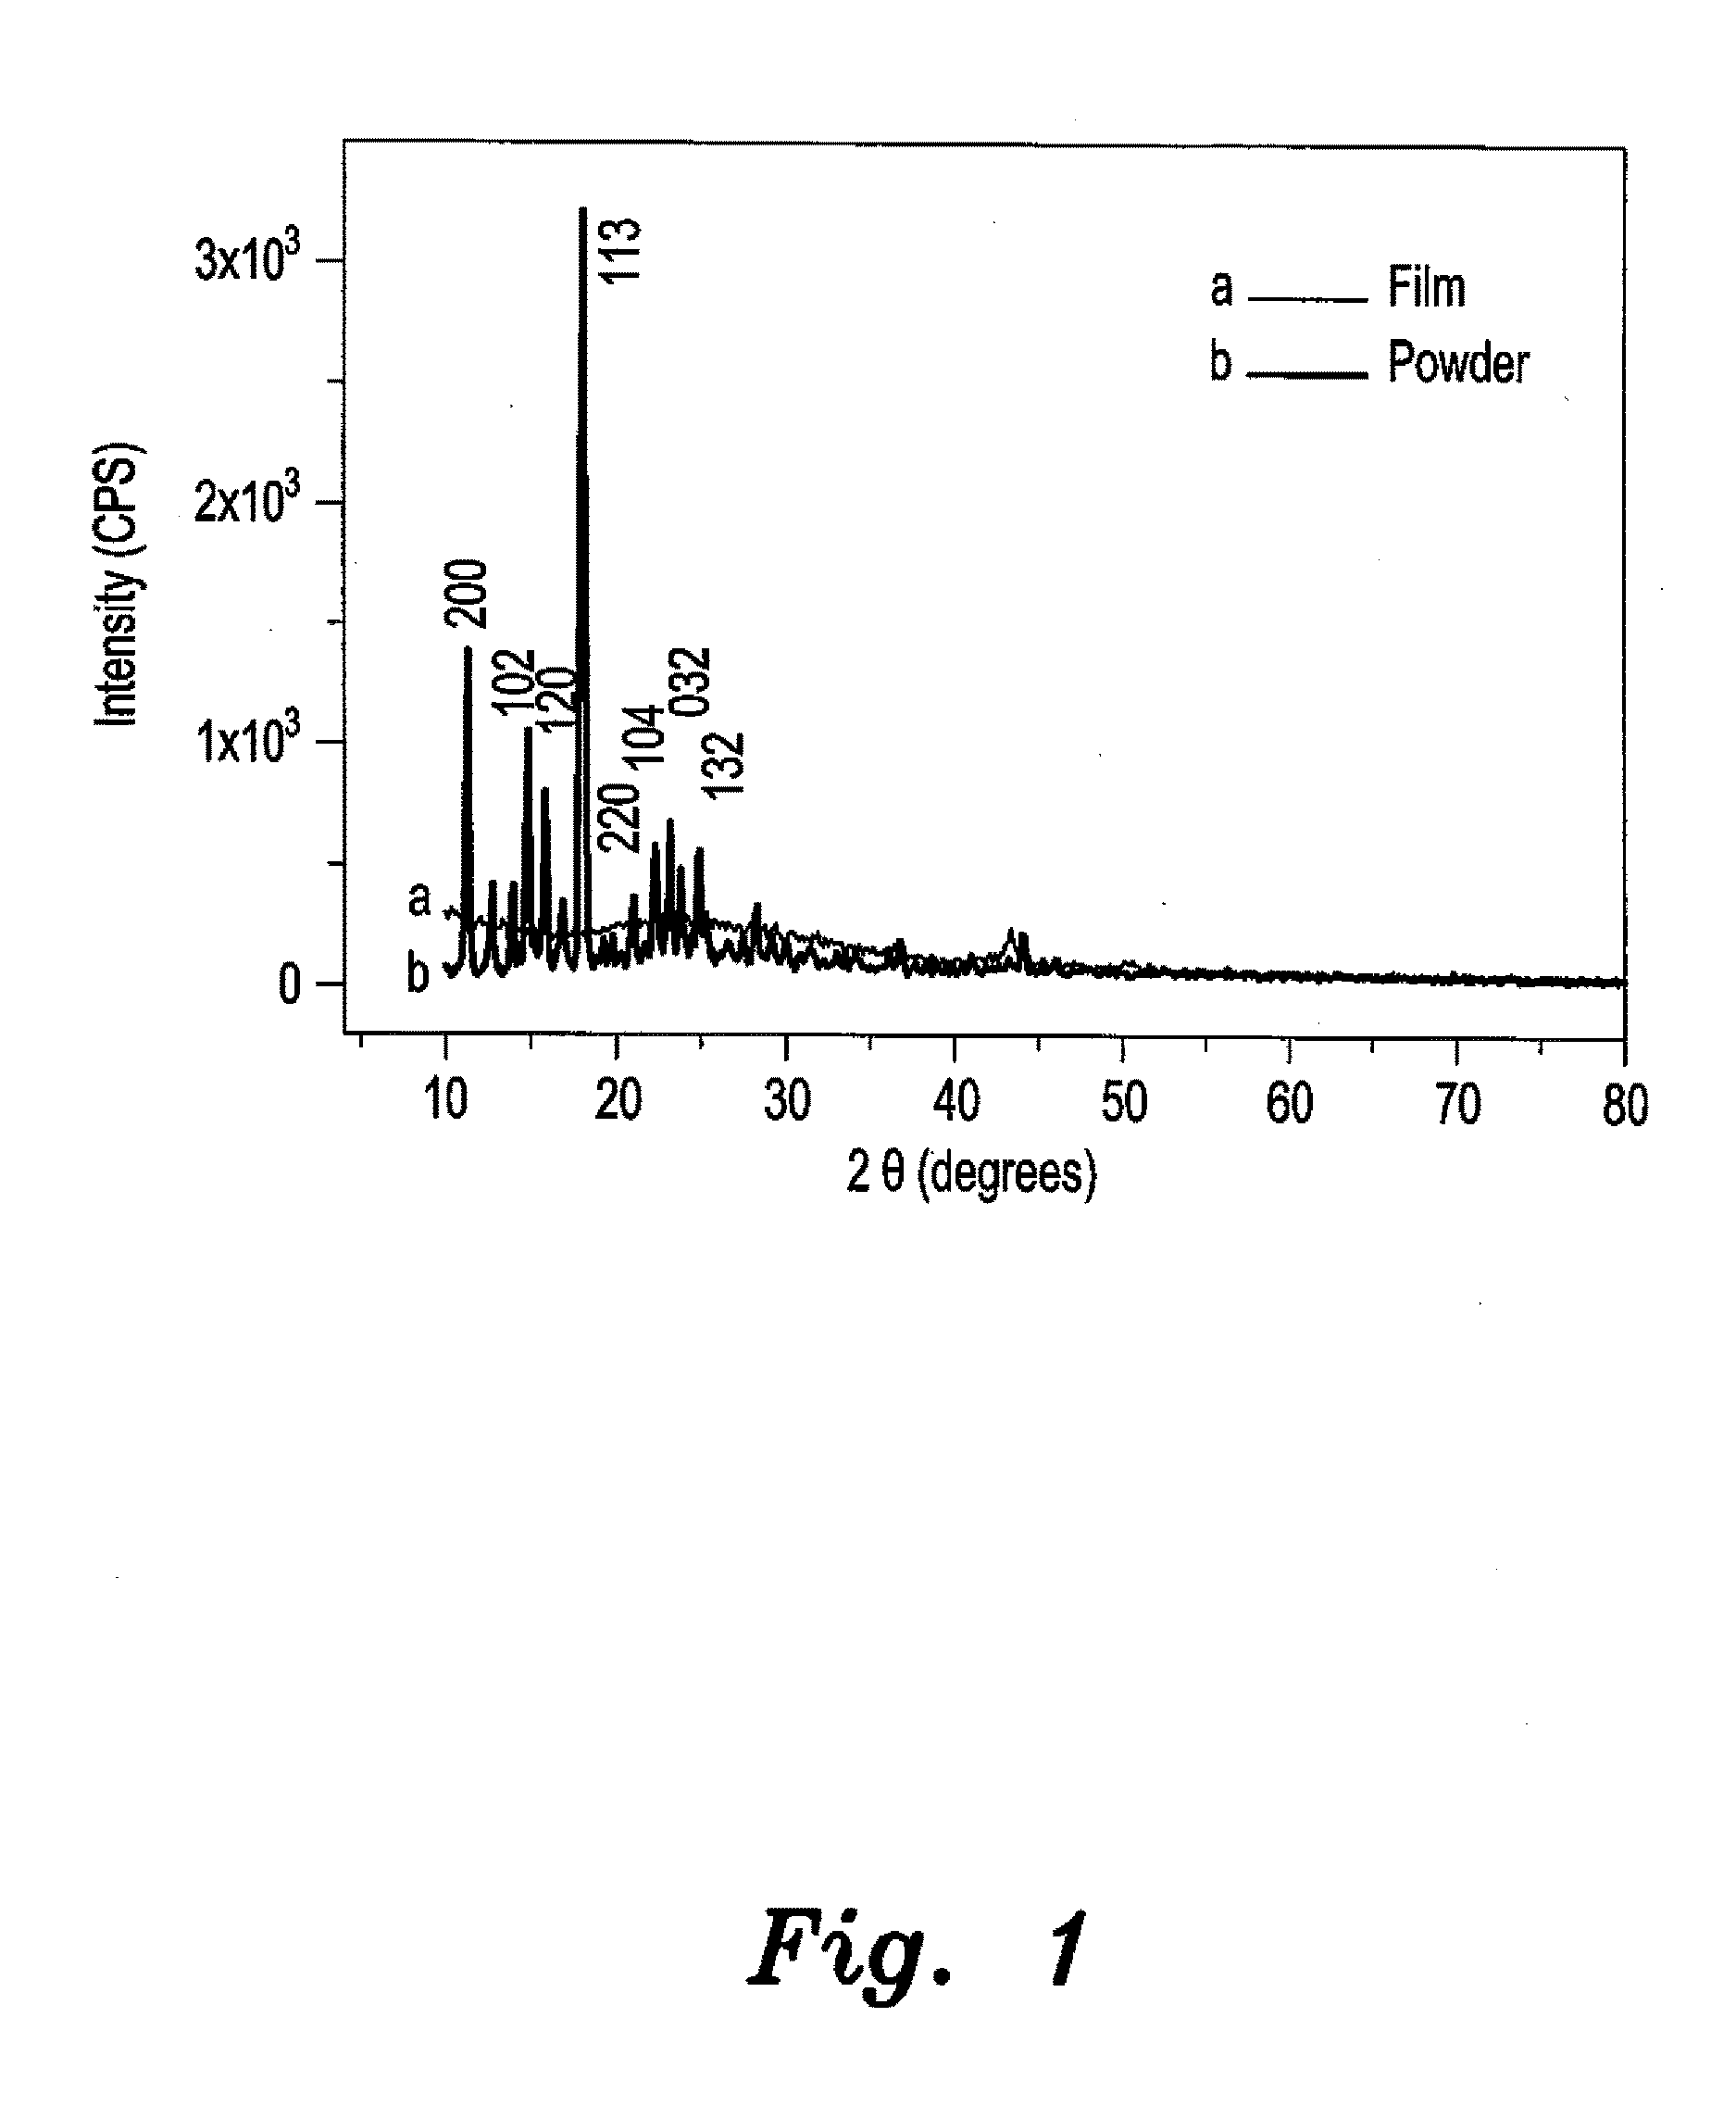 Method of making doped alq3 nanostructures with enhanced photoluminescence